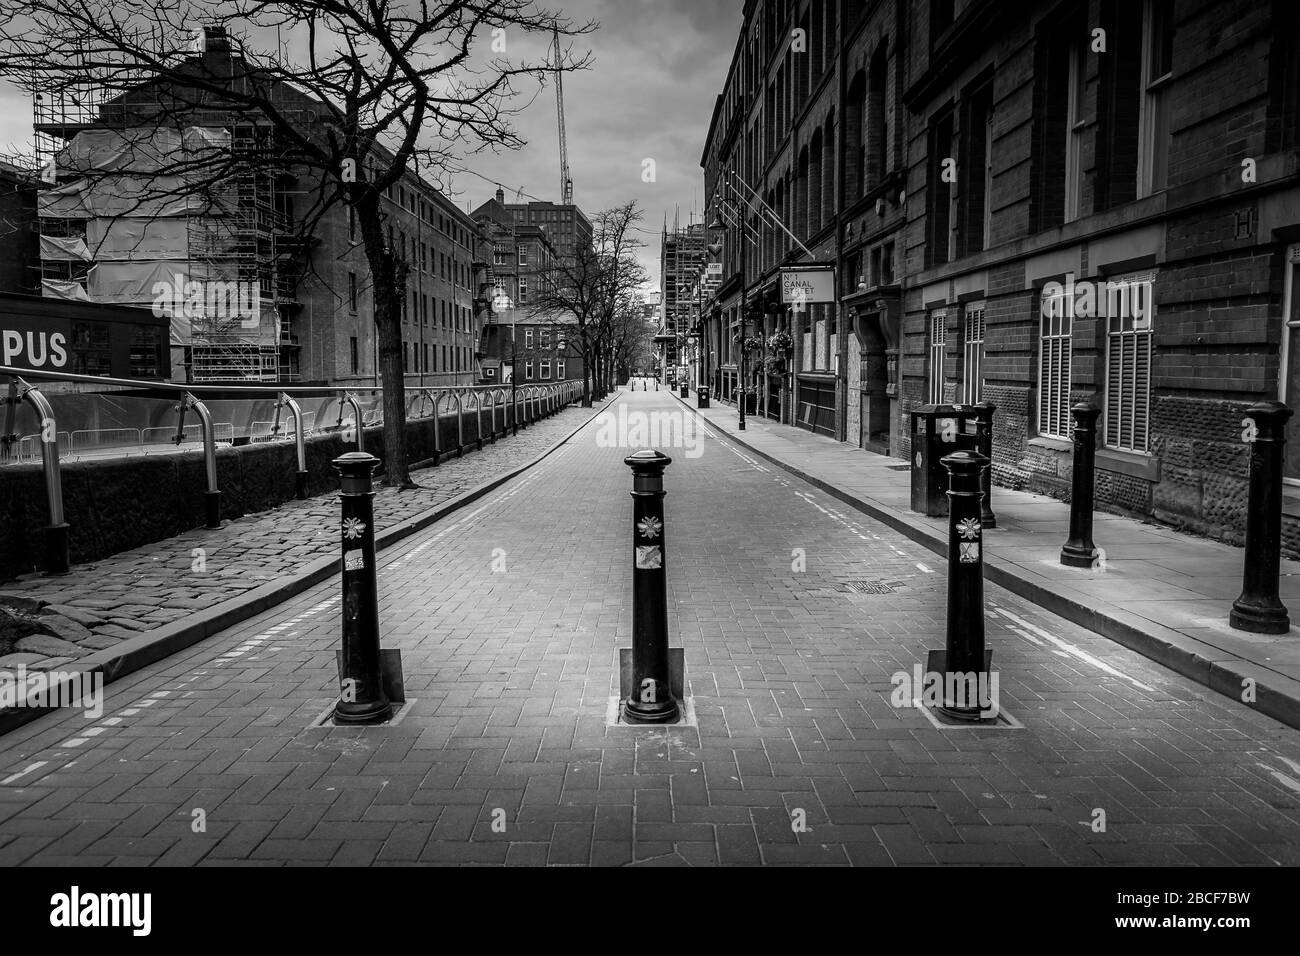 Canal Street, The Gay Village, Manchester, United Kingdom. Empty streets, closed business's during the coronavirus outbreak, April 2020. Stock Photo